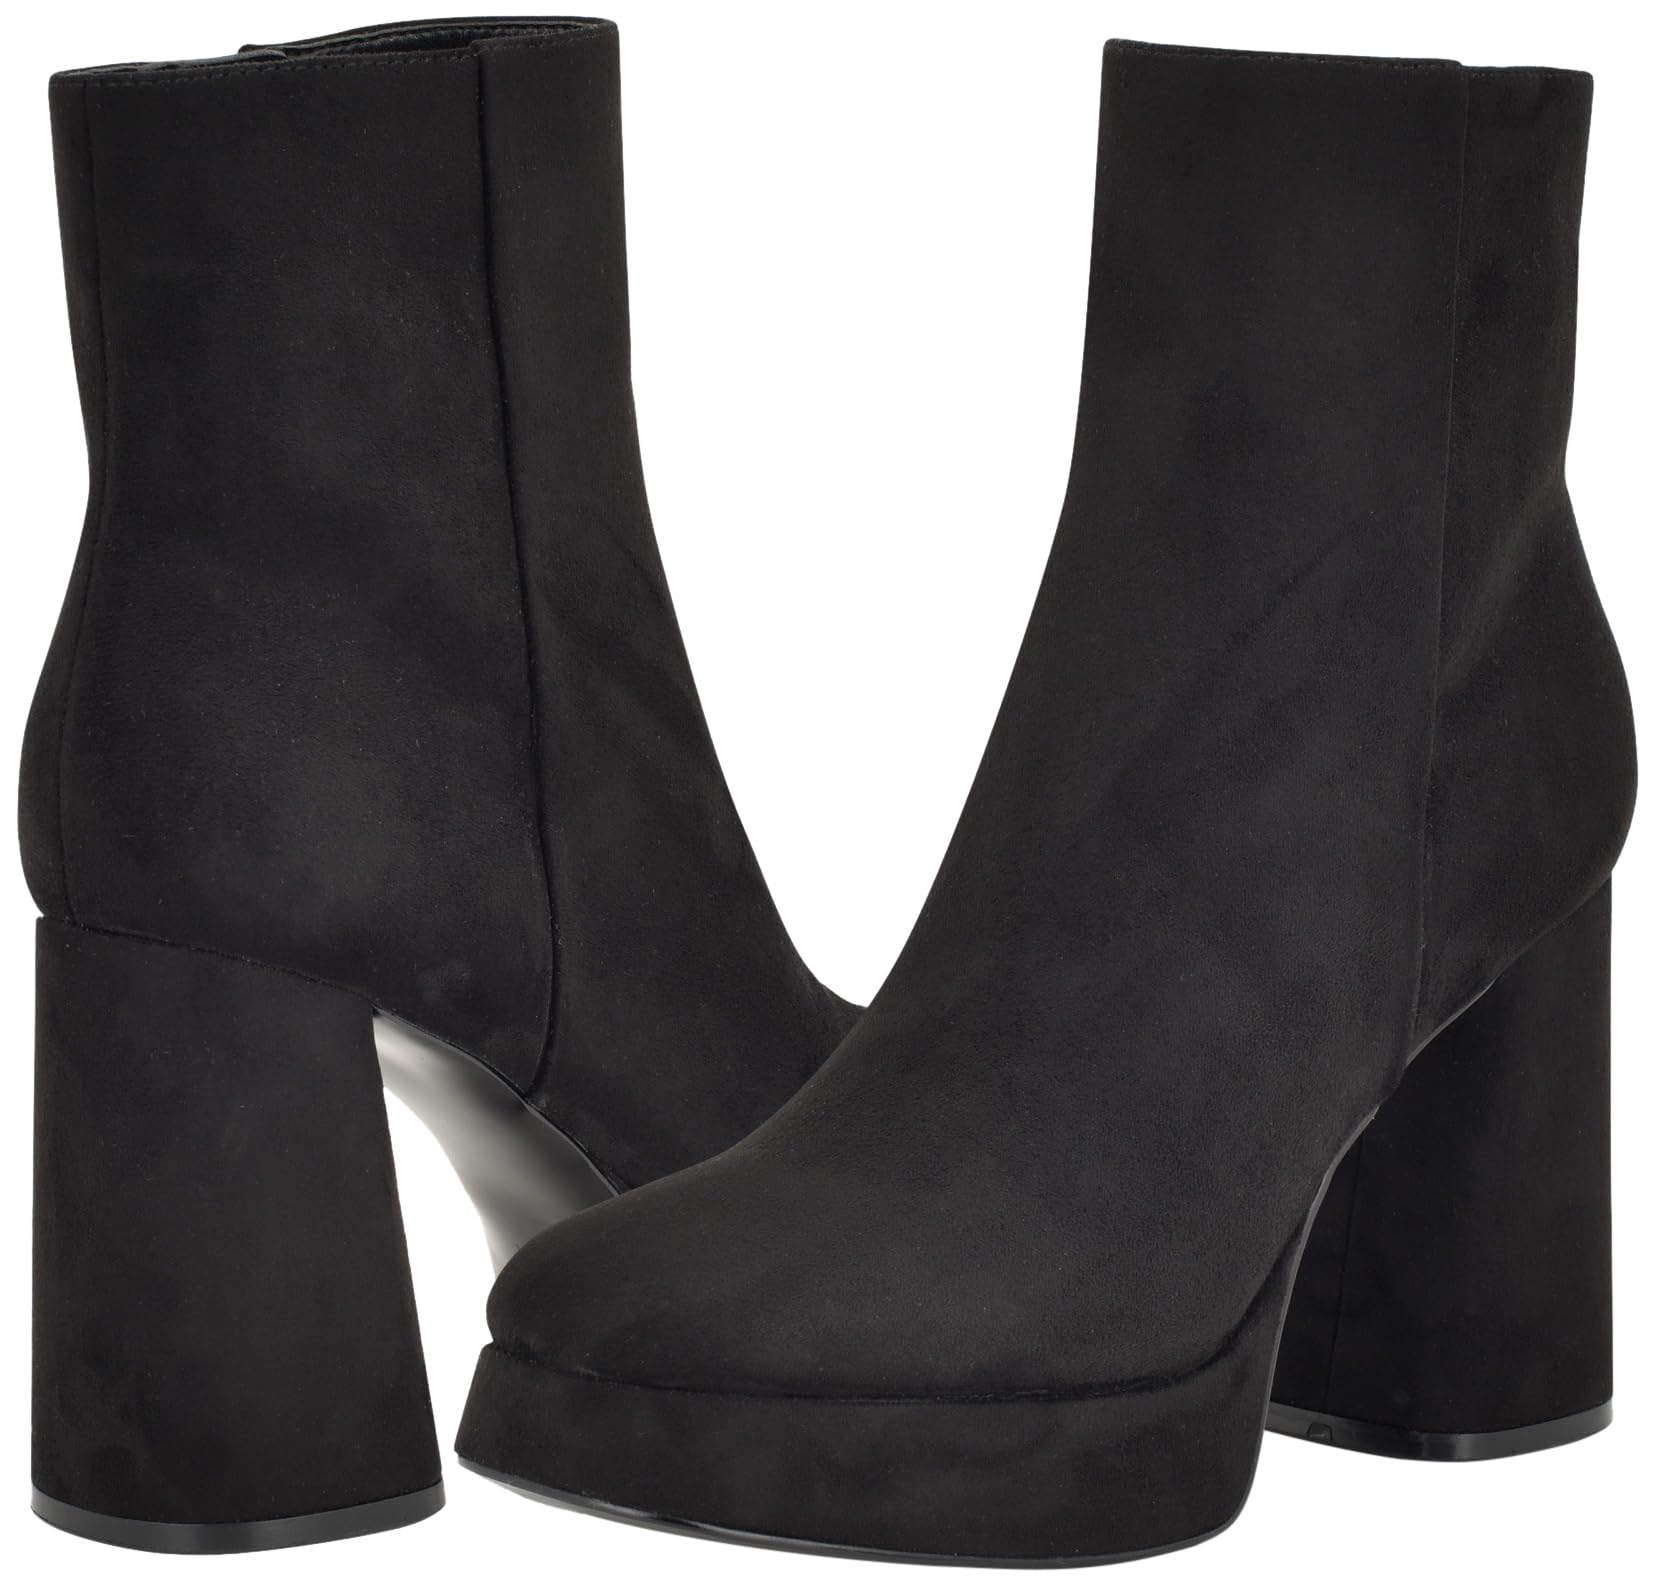 Nine West Women's Velo Ankle Boot (Select Sizes, Black) $28 + Free Shipping w/ Prime or on $35+